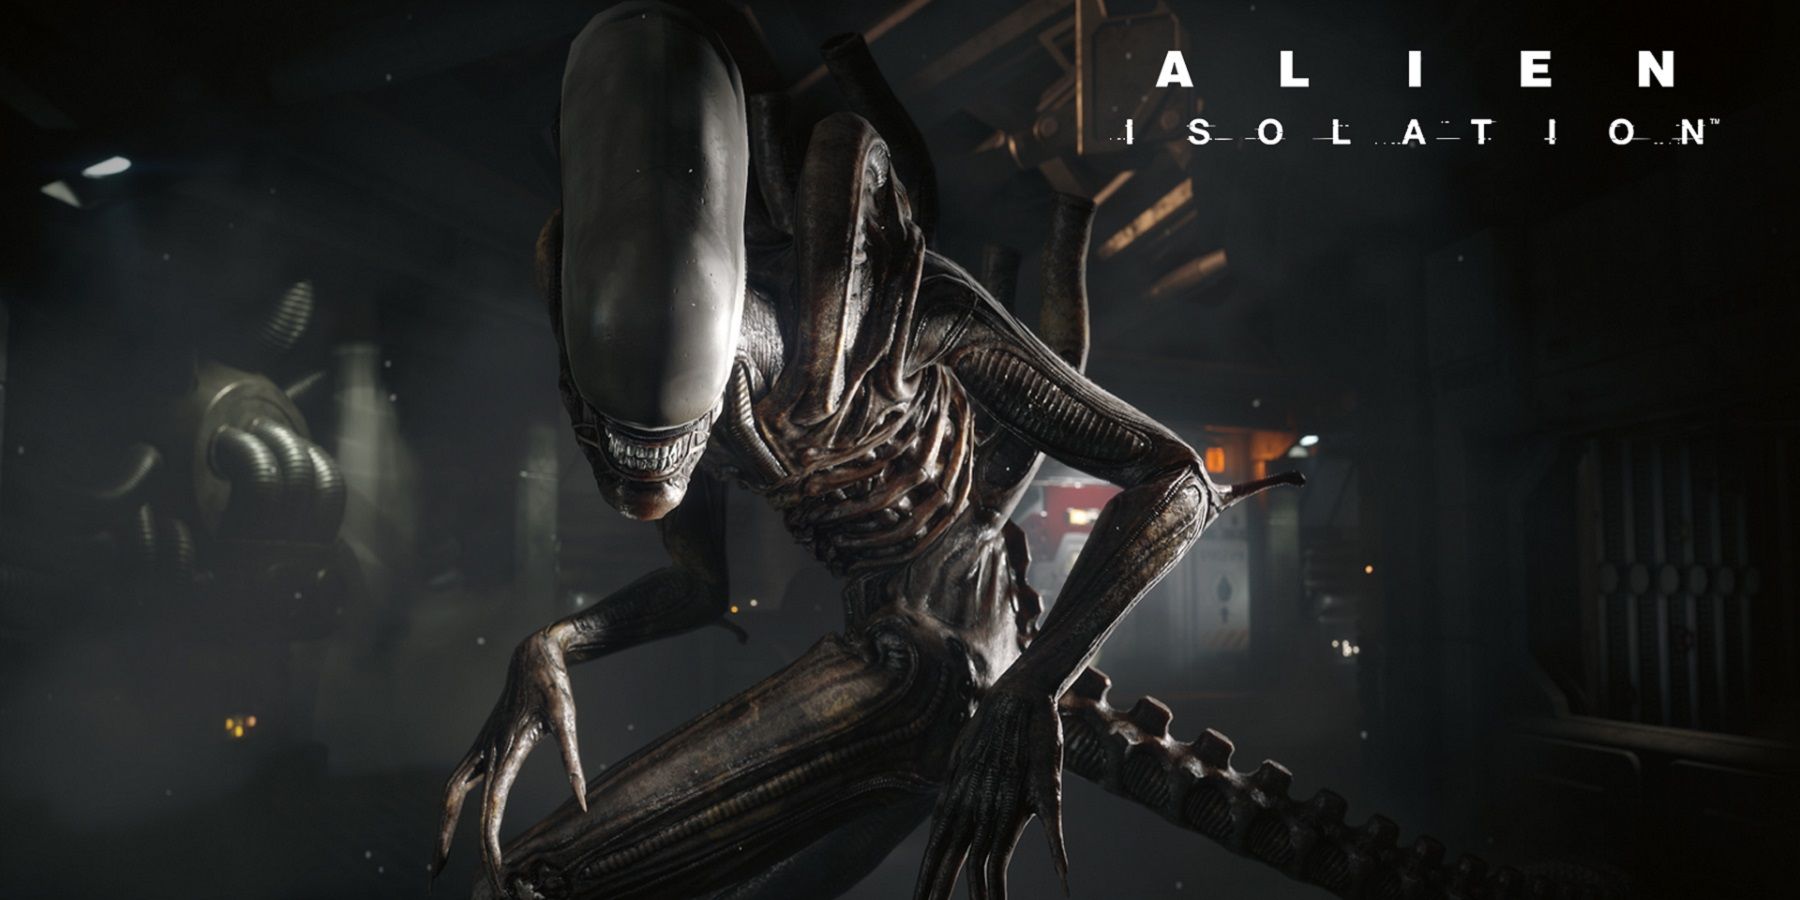 Image from Alien Isolation showing a close up of te Xenomorph.